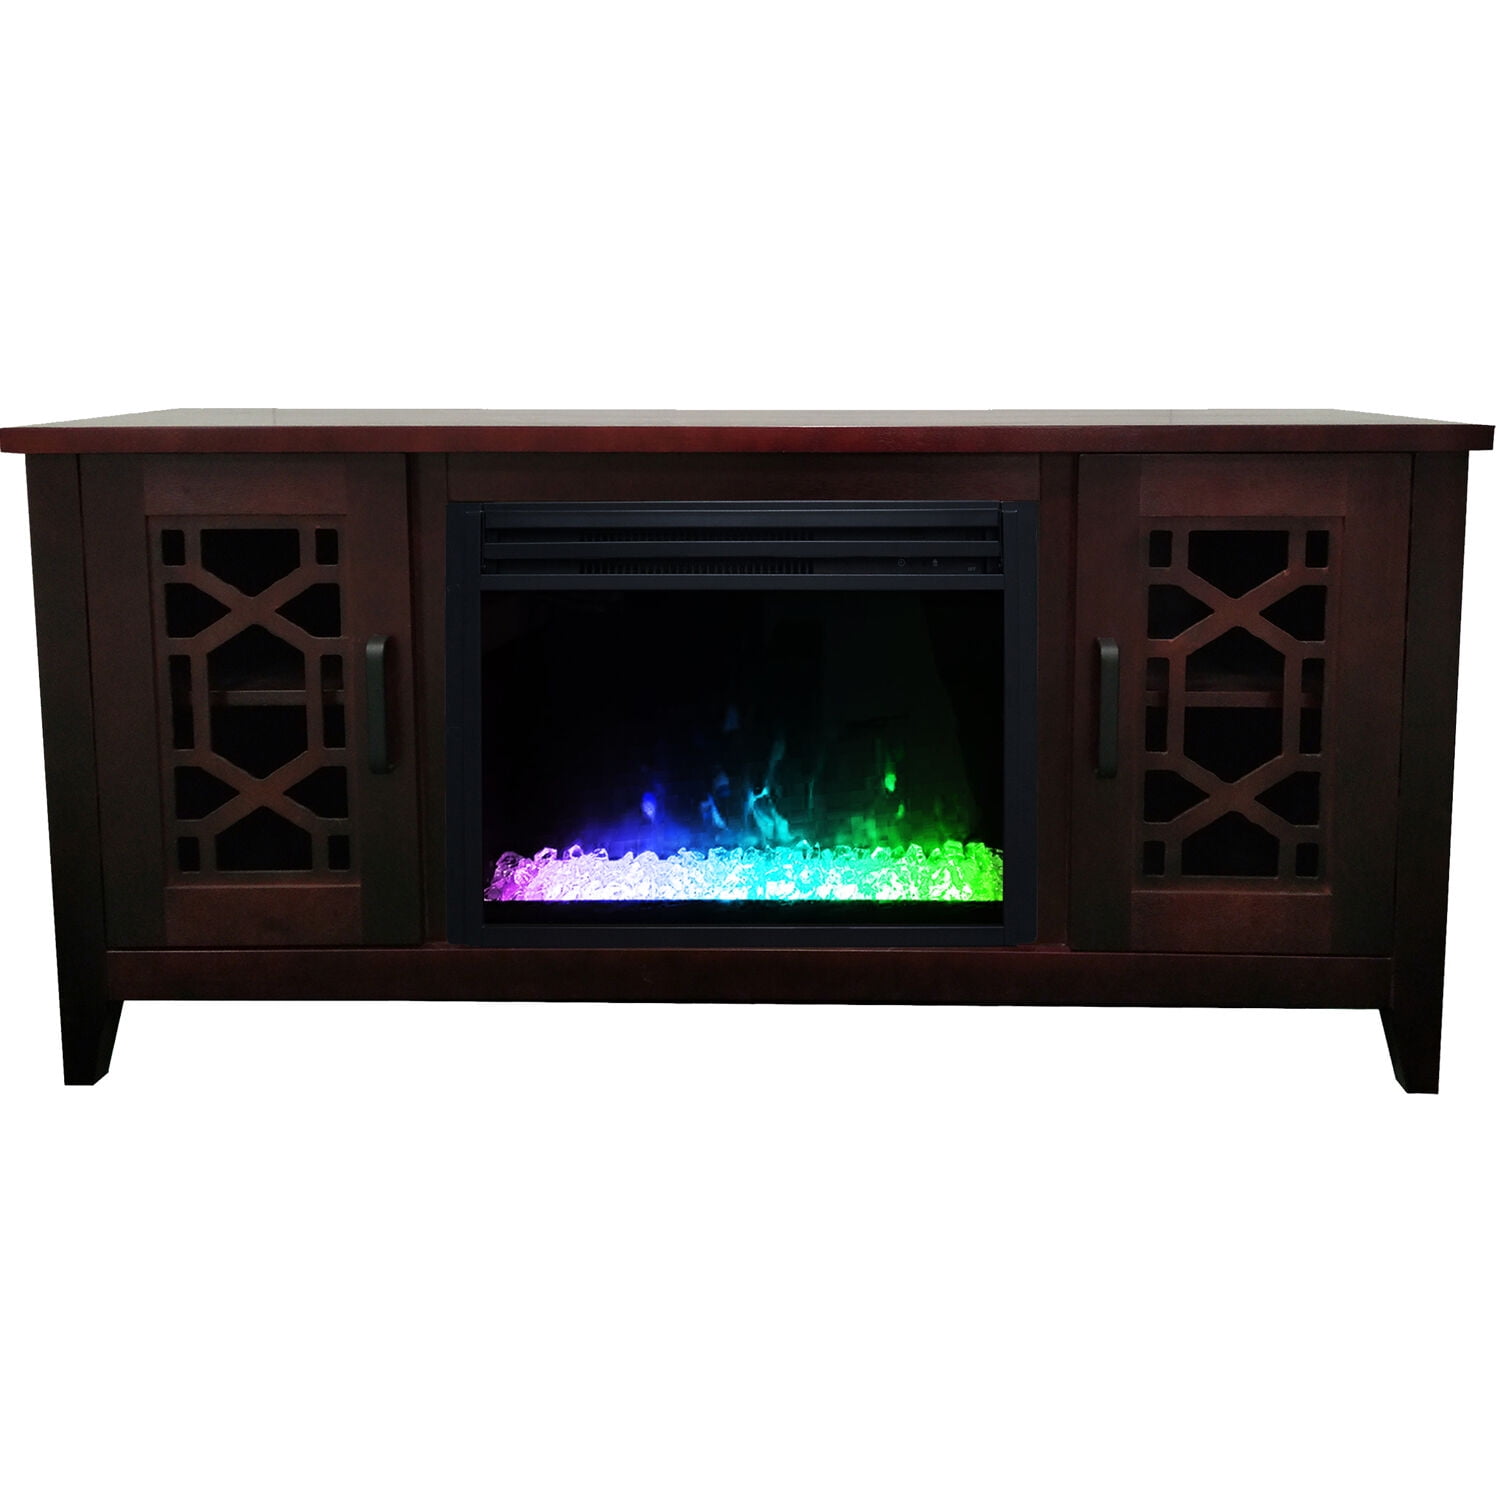 TKM Home 56-In. Stardust Mid-Century Modern Electric Fireplace With Deep Multi-Color Crystal Insert, Mahogany